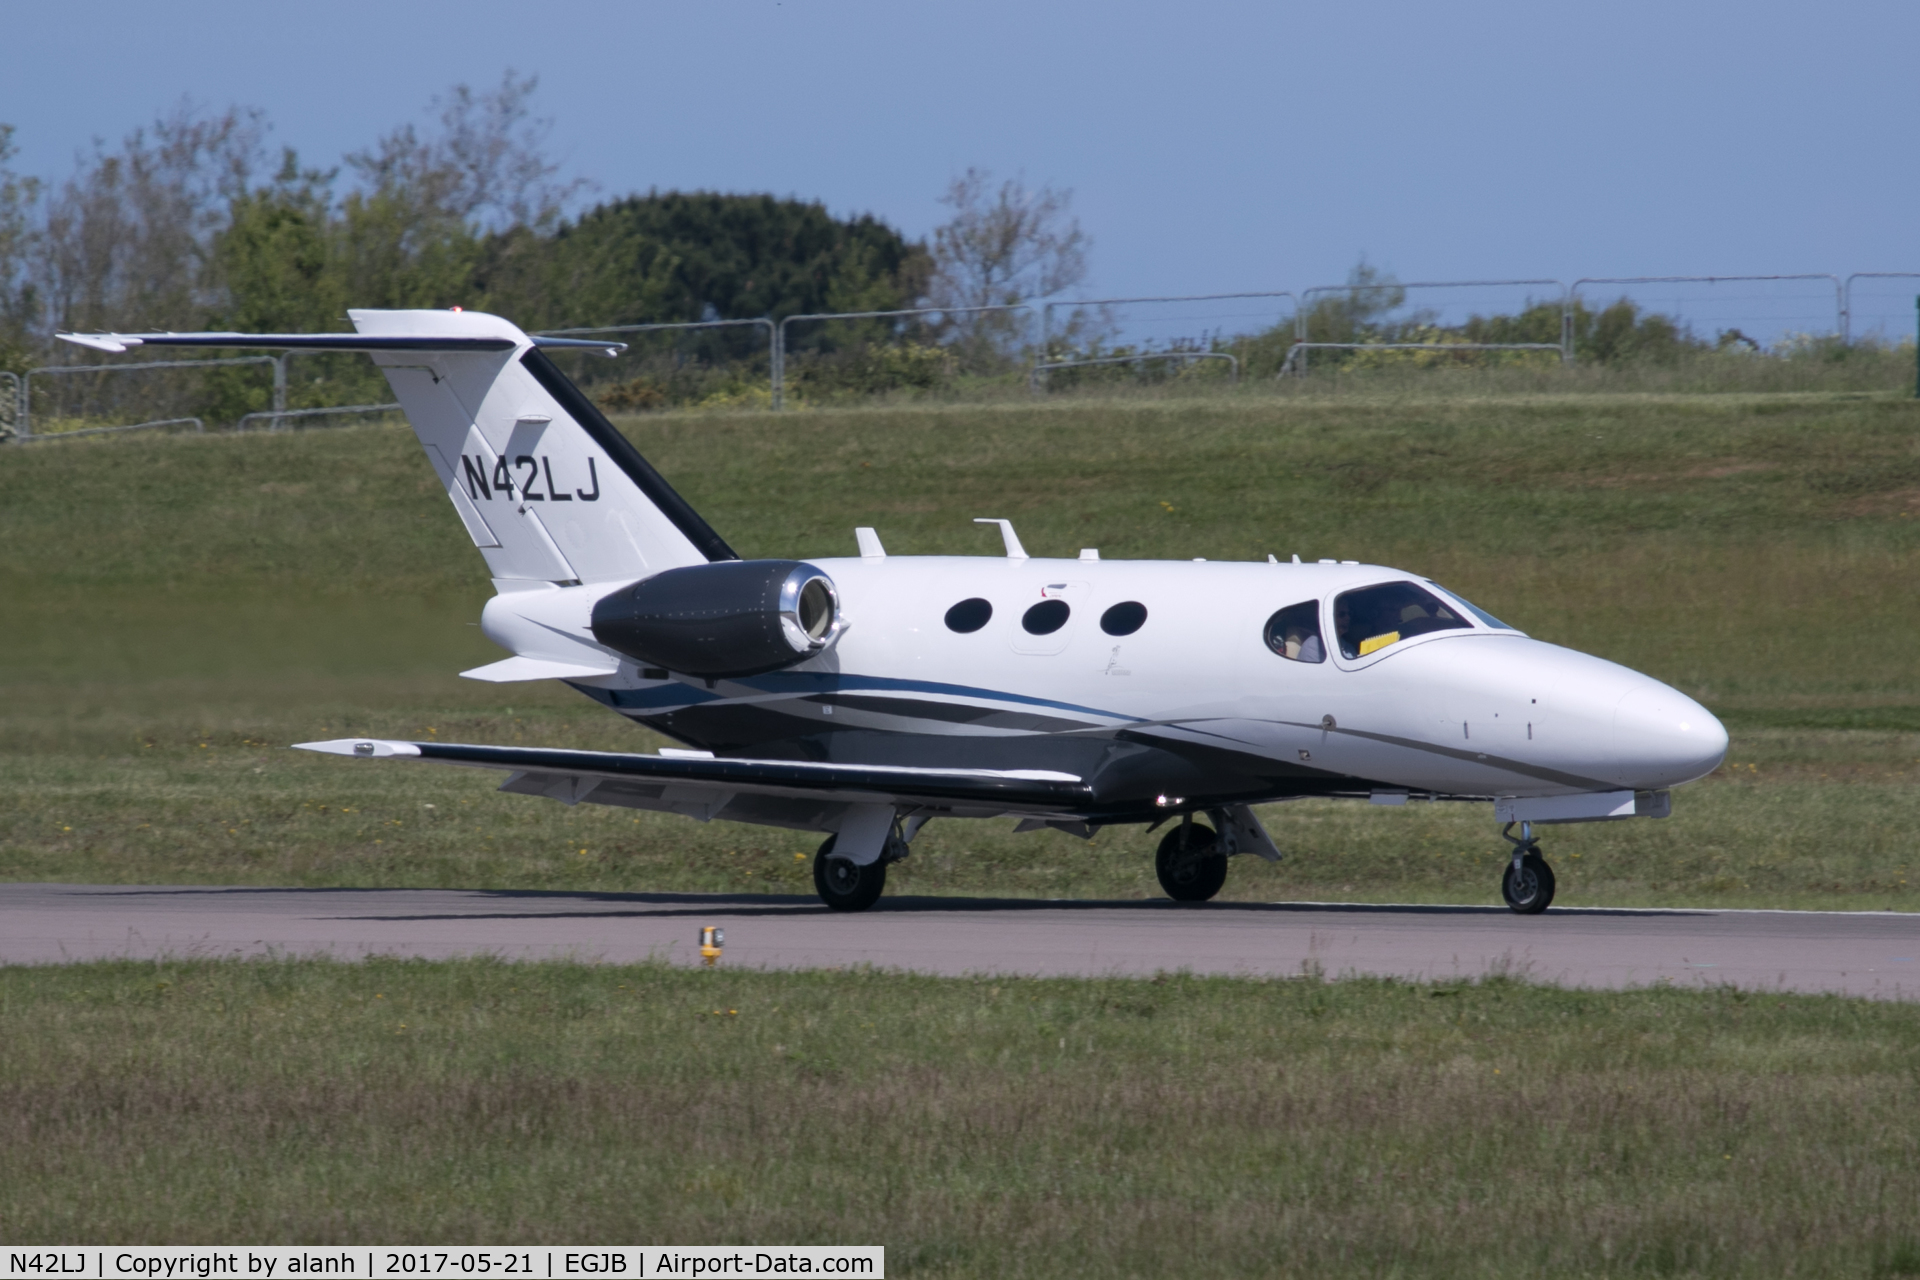 N42LJ, 2015 Cessna 510 Citation Mustang Citation Mustang C/N 510-0462, Rolling out after arrival in Guernsey